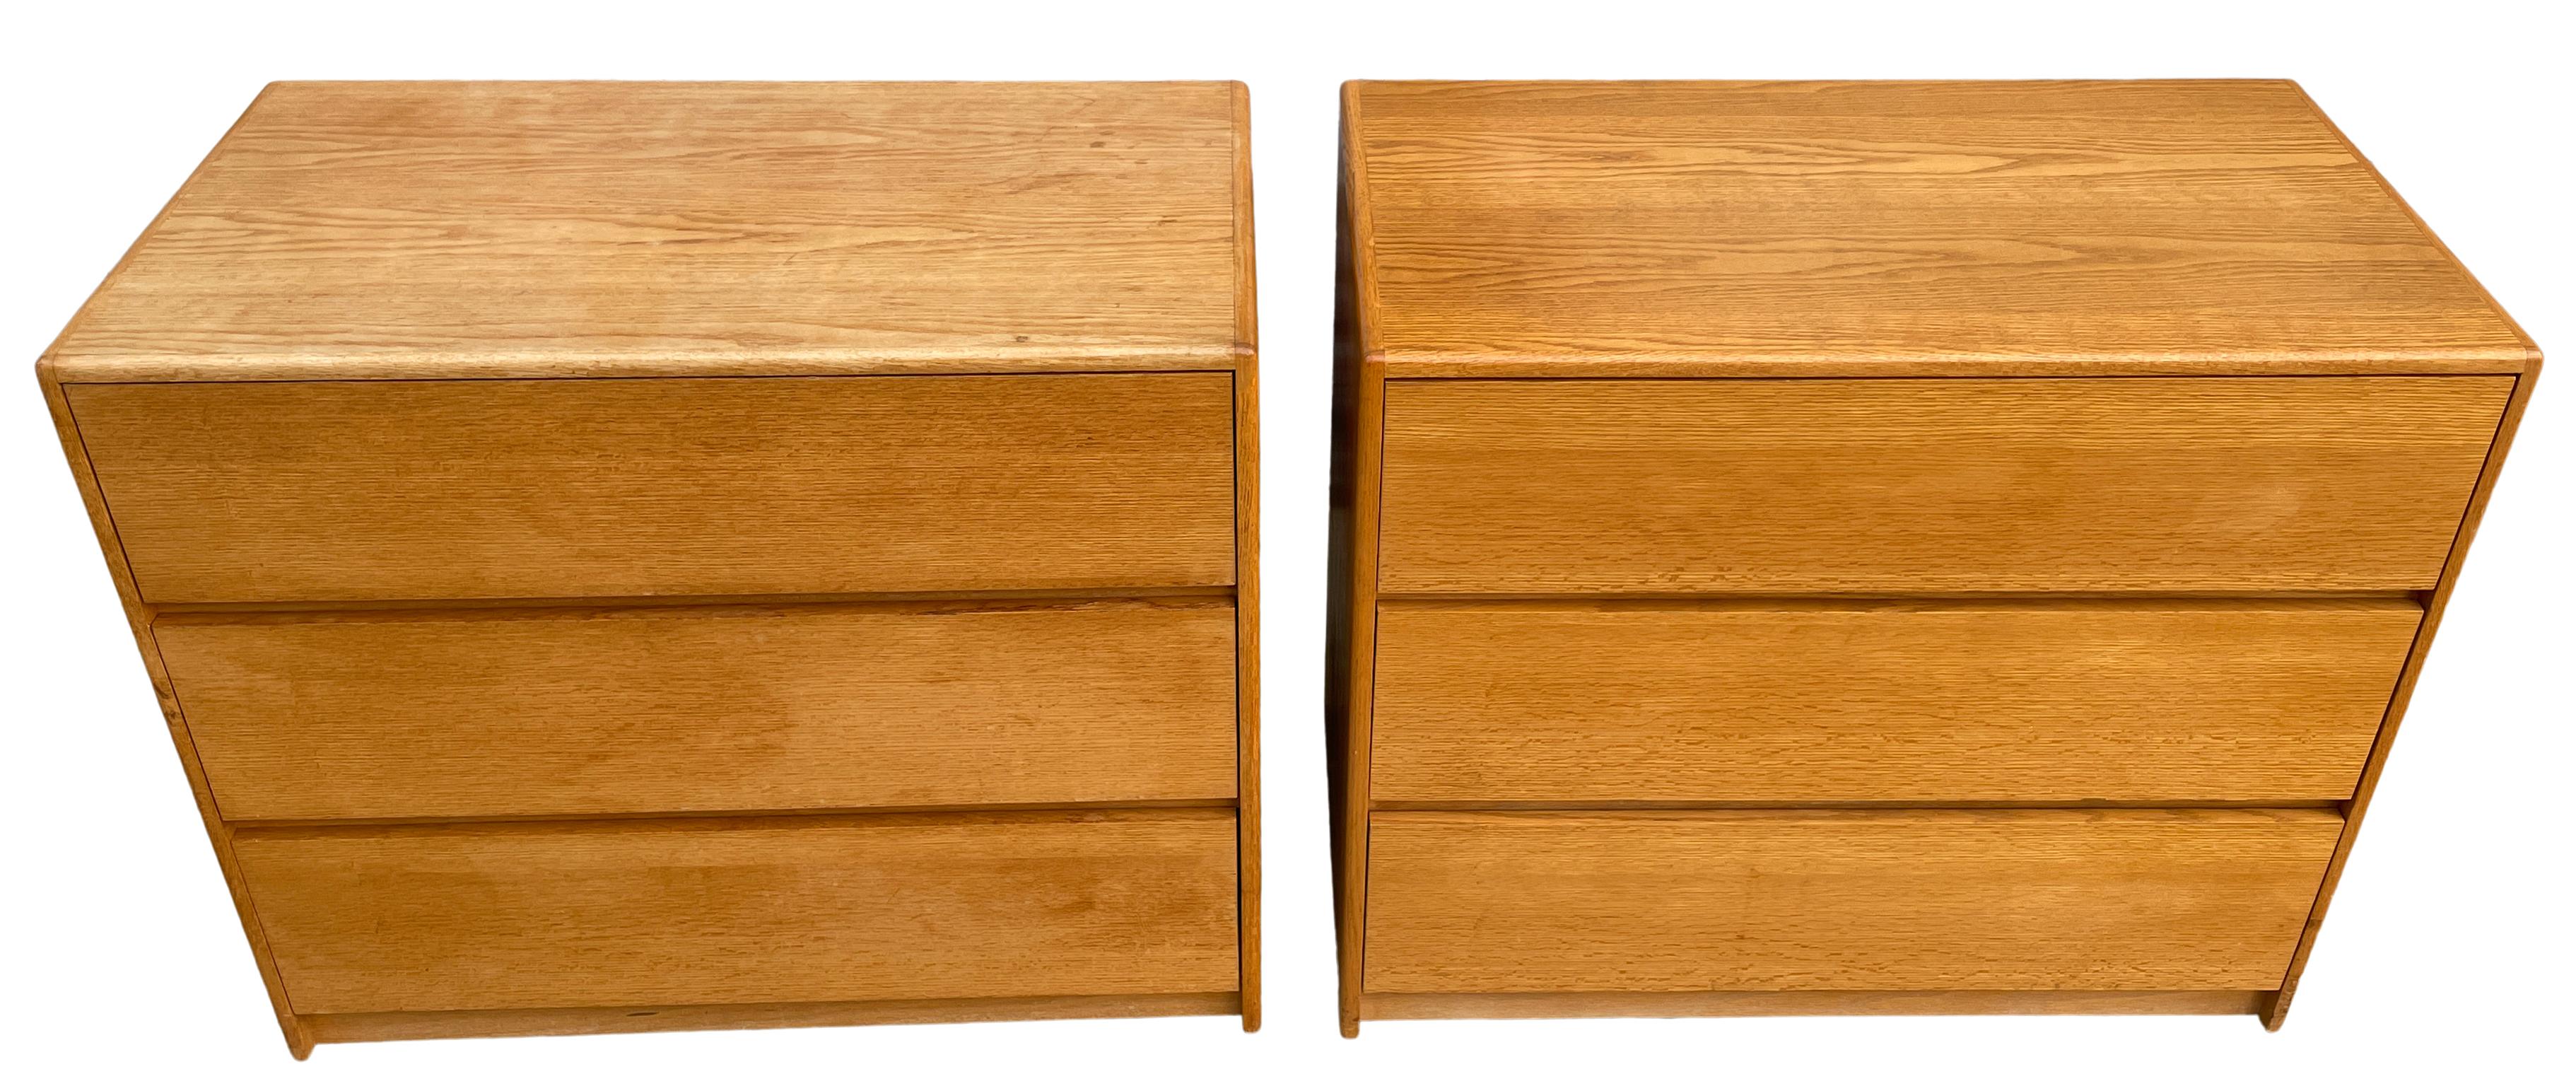 Simple pair of Mid-Century Modern 3 drawer white oak dressers very clean. Some drawers have removable wood dividers. All white oak construction. All drawers slide smooth and are clean inside. This listing is for (2) dressers (1) pair.